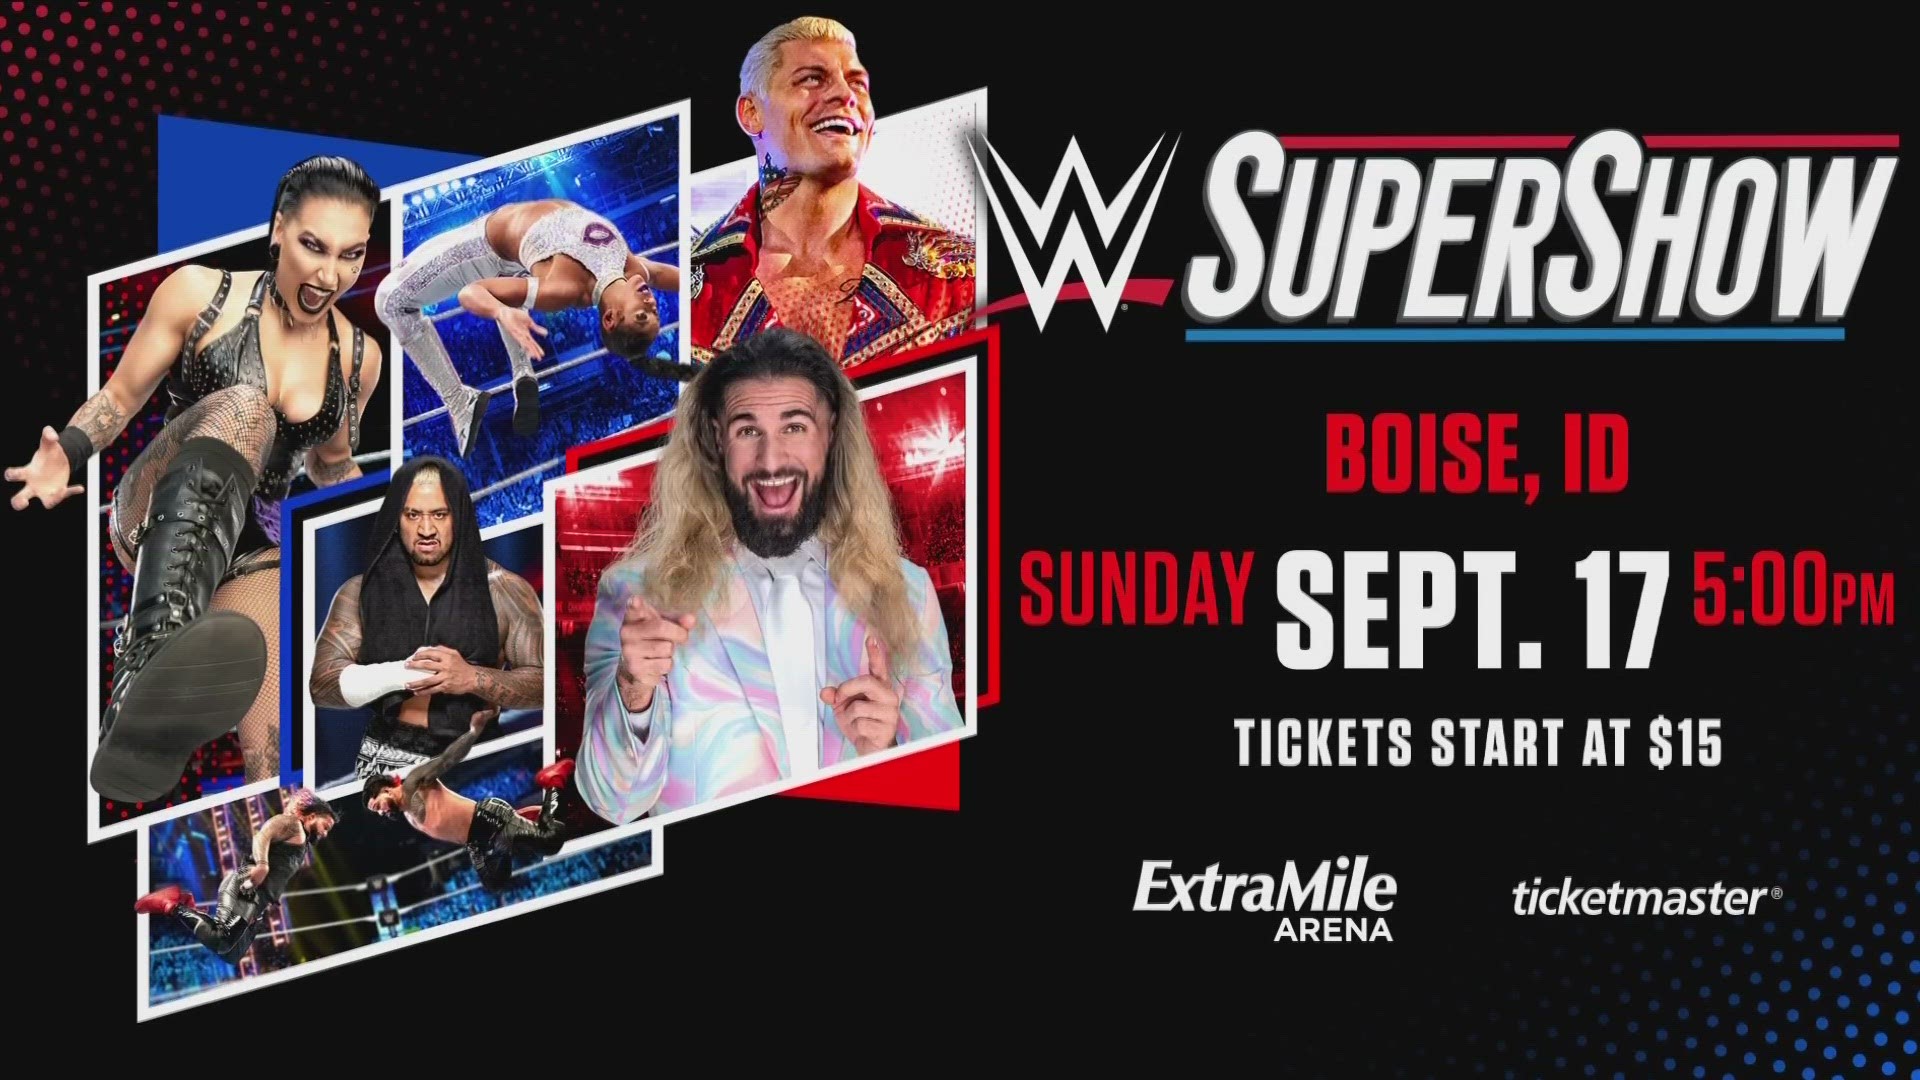 WWE Supershow coming to Boise this fall